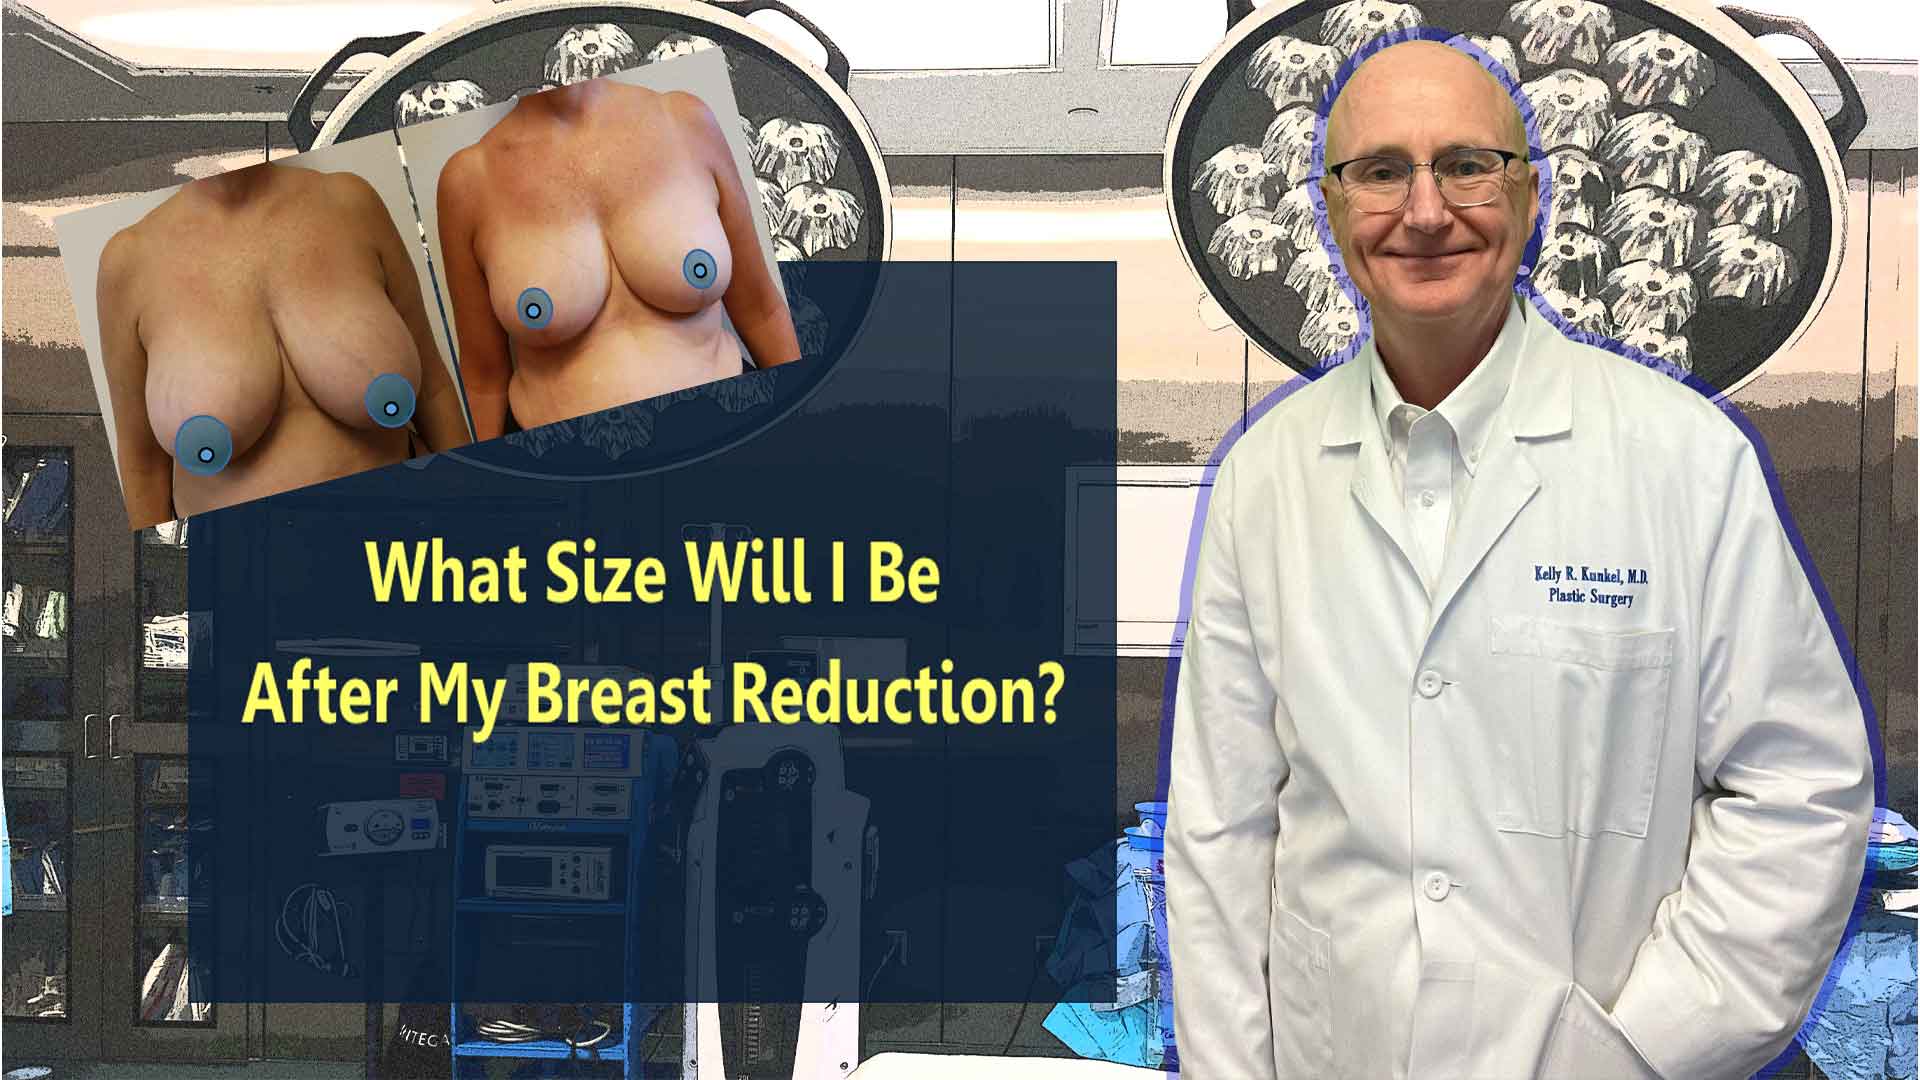 Thumbnail image of Dr. Kunkel's "What Size Will I Be After My Breast Reduction" video